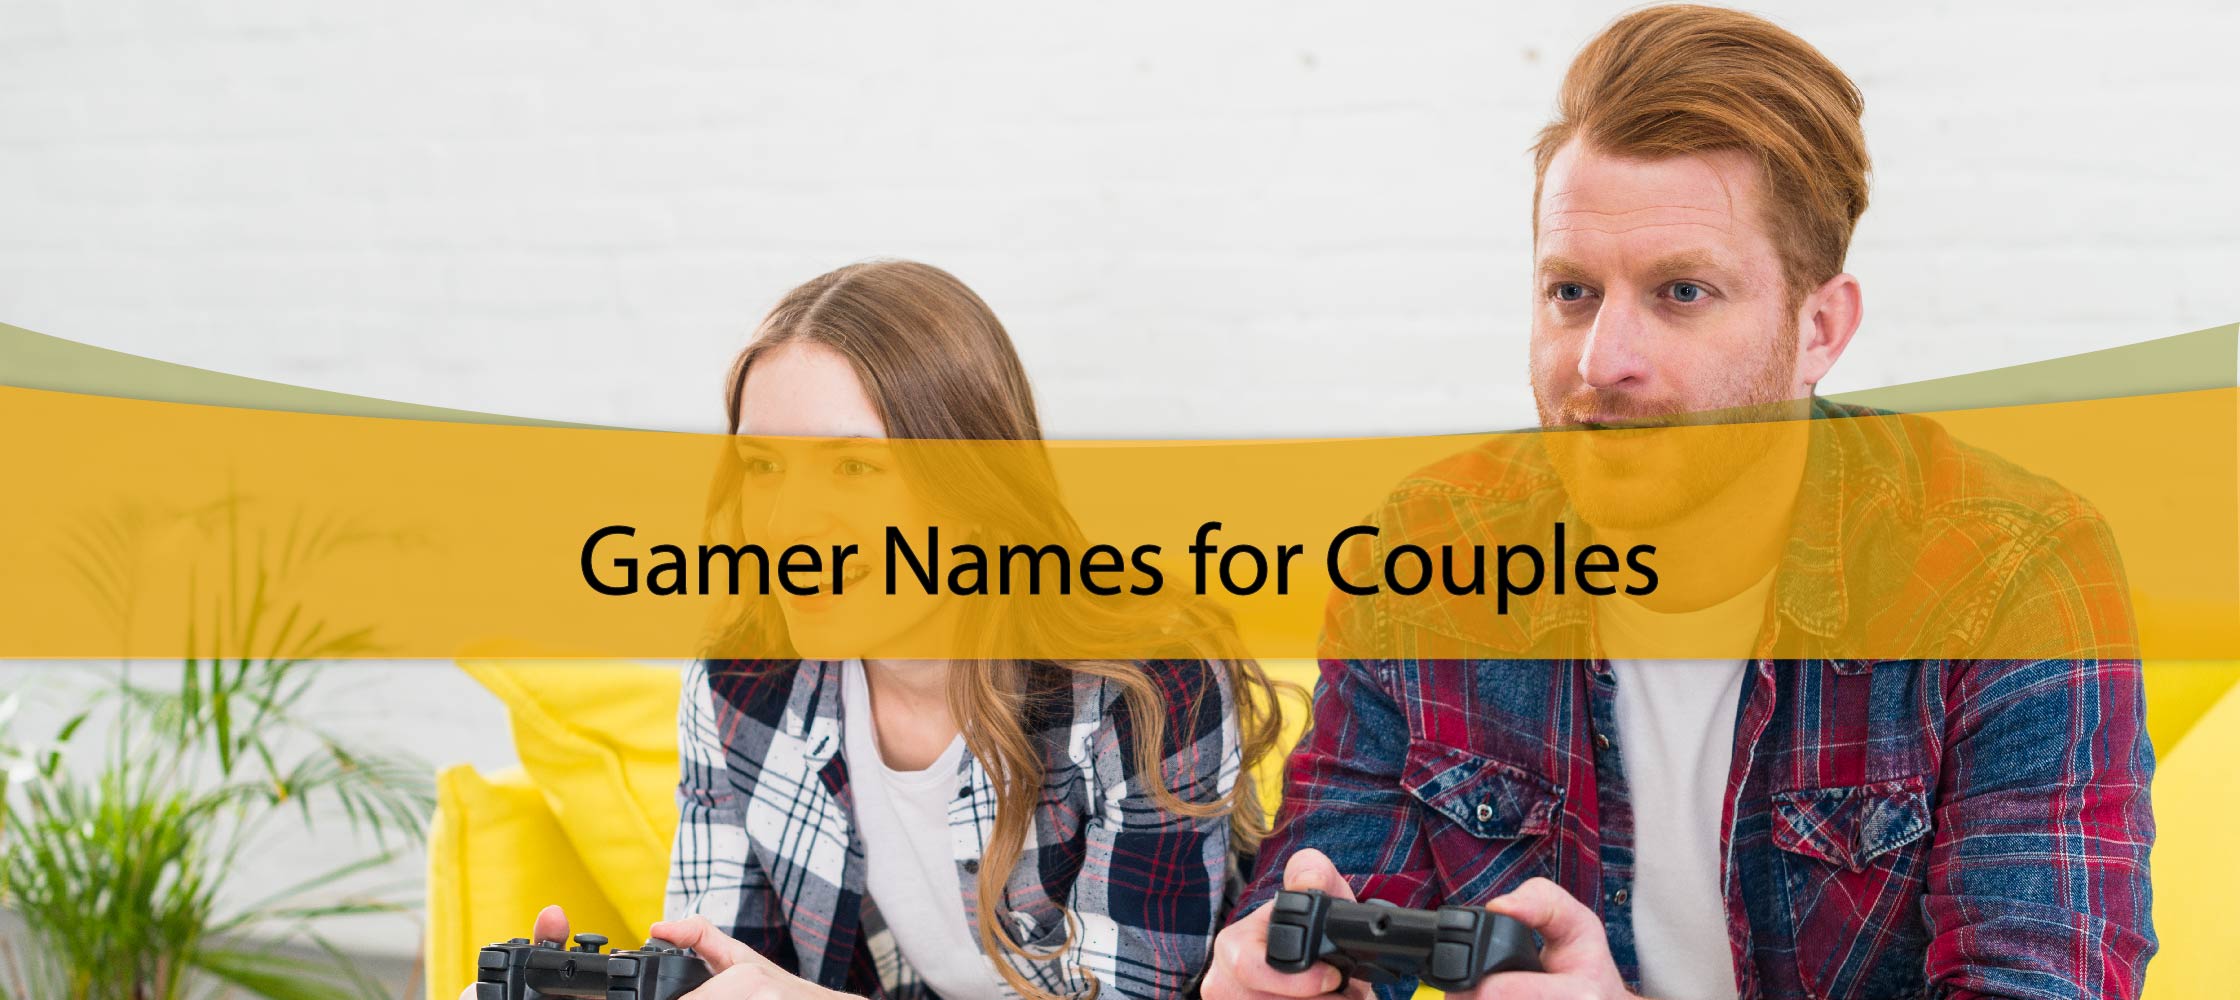 Gamer Names for Couples